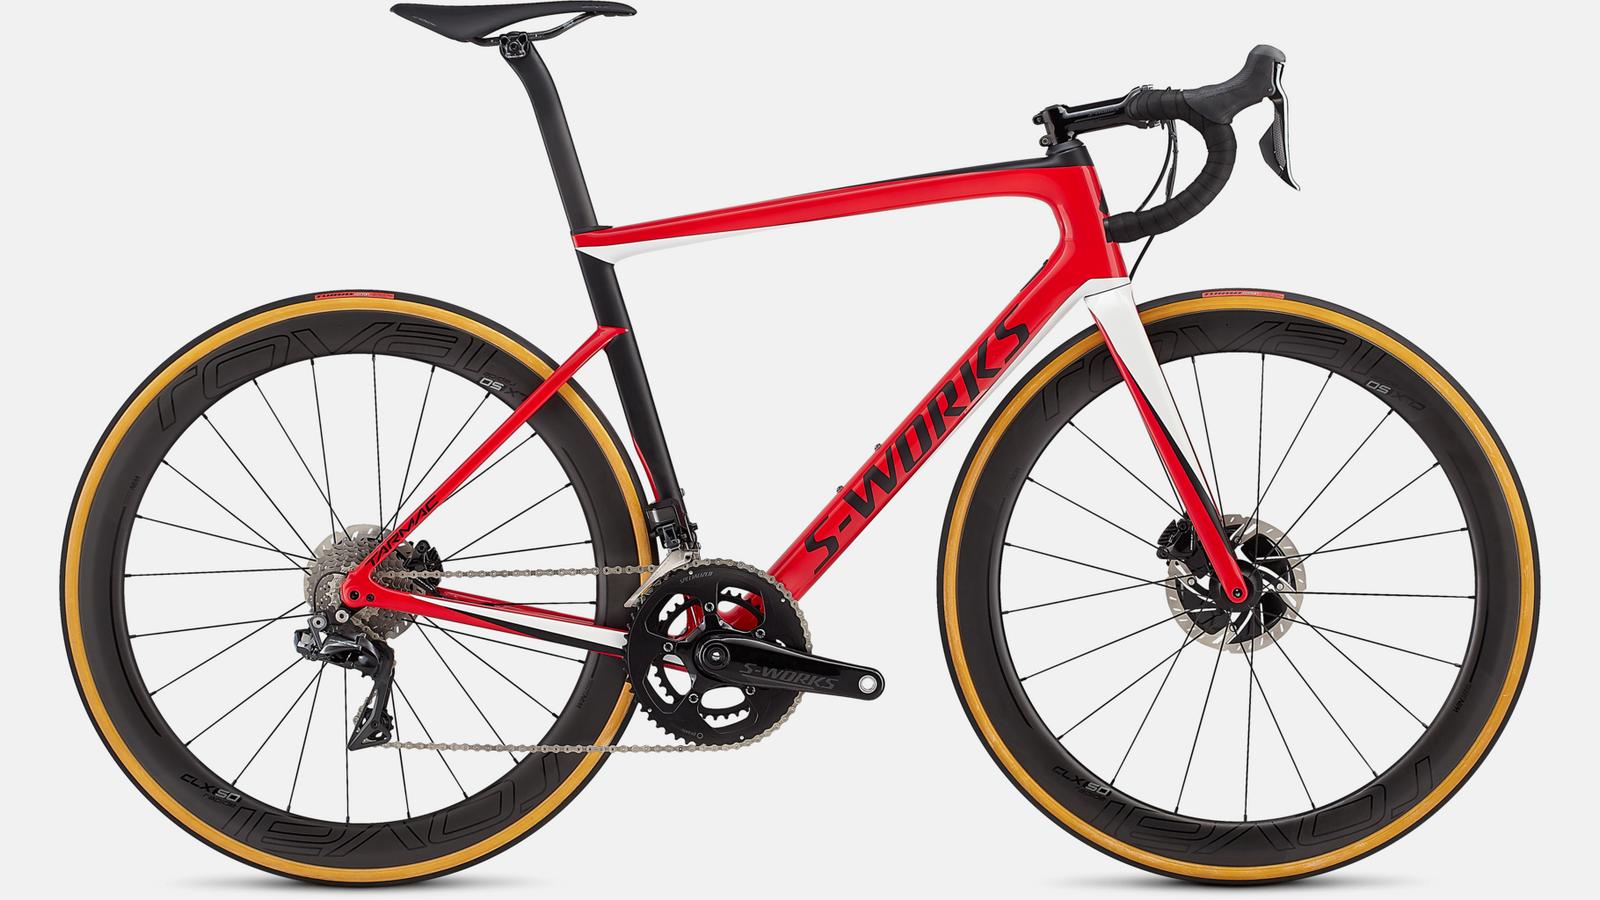 Touch-up paint for 2019 Specialized Men's S-Works Tarmac Disc - Gloss Flo Red